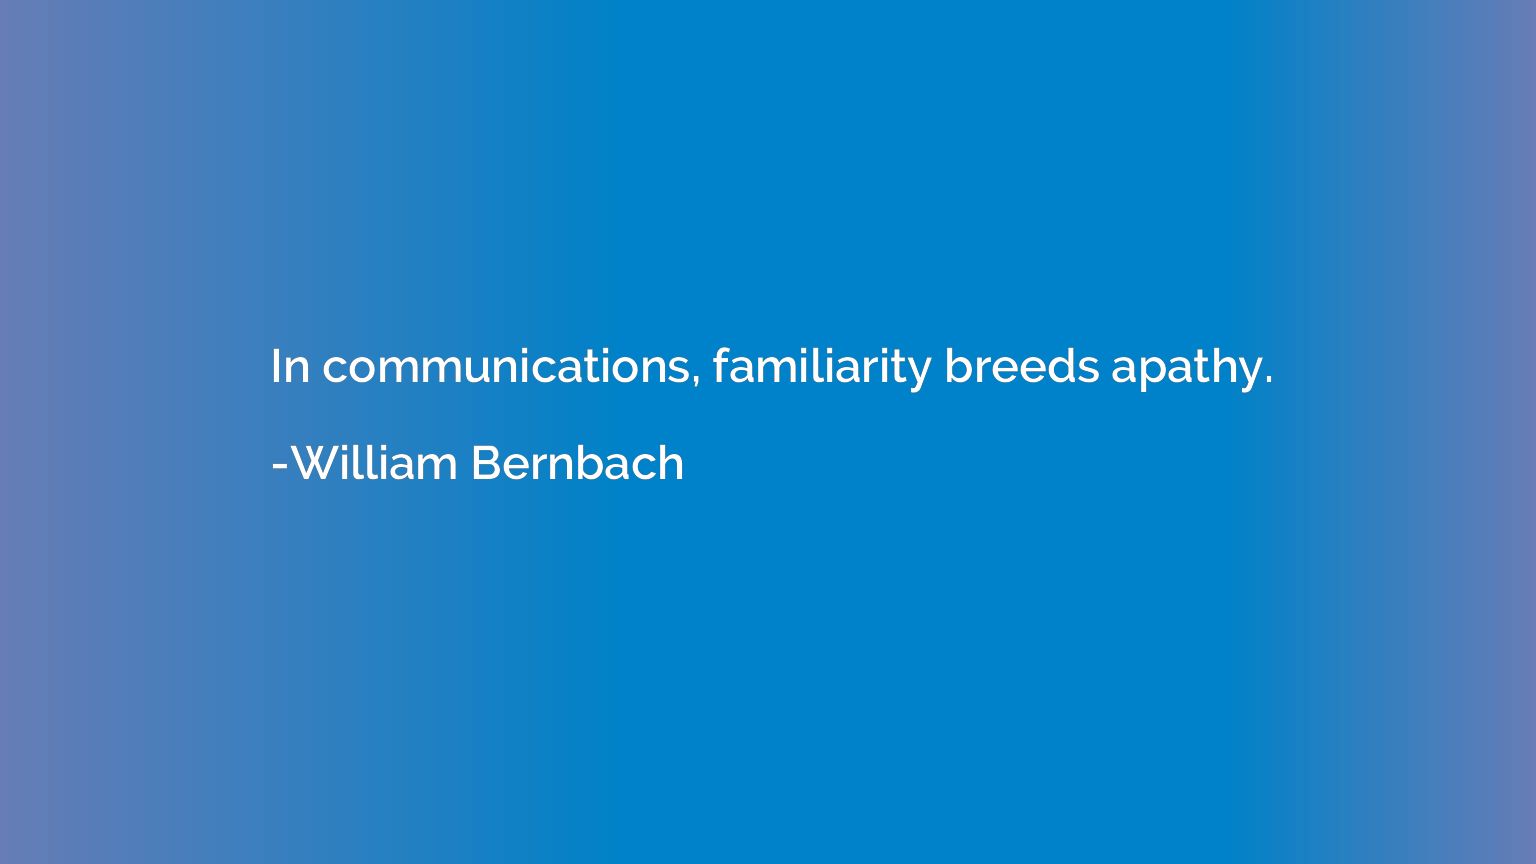 In communications, familiarity breeds apathy.